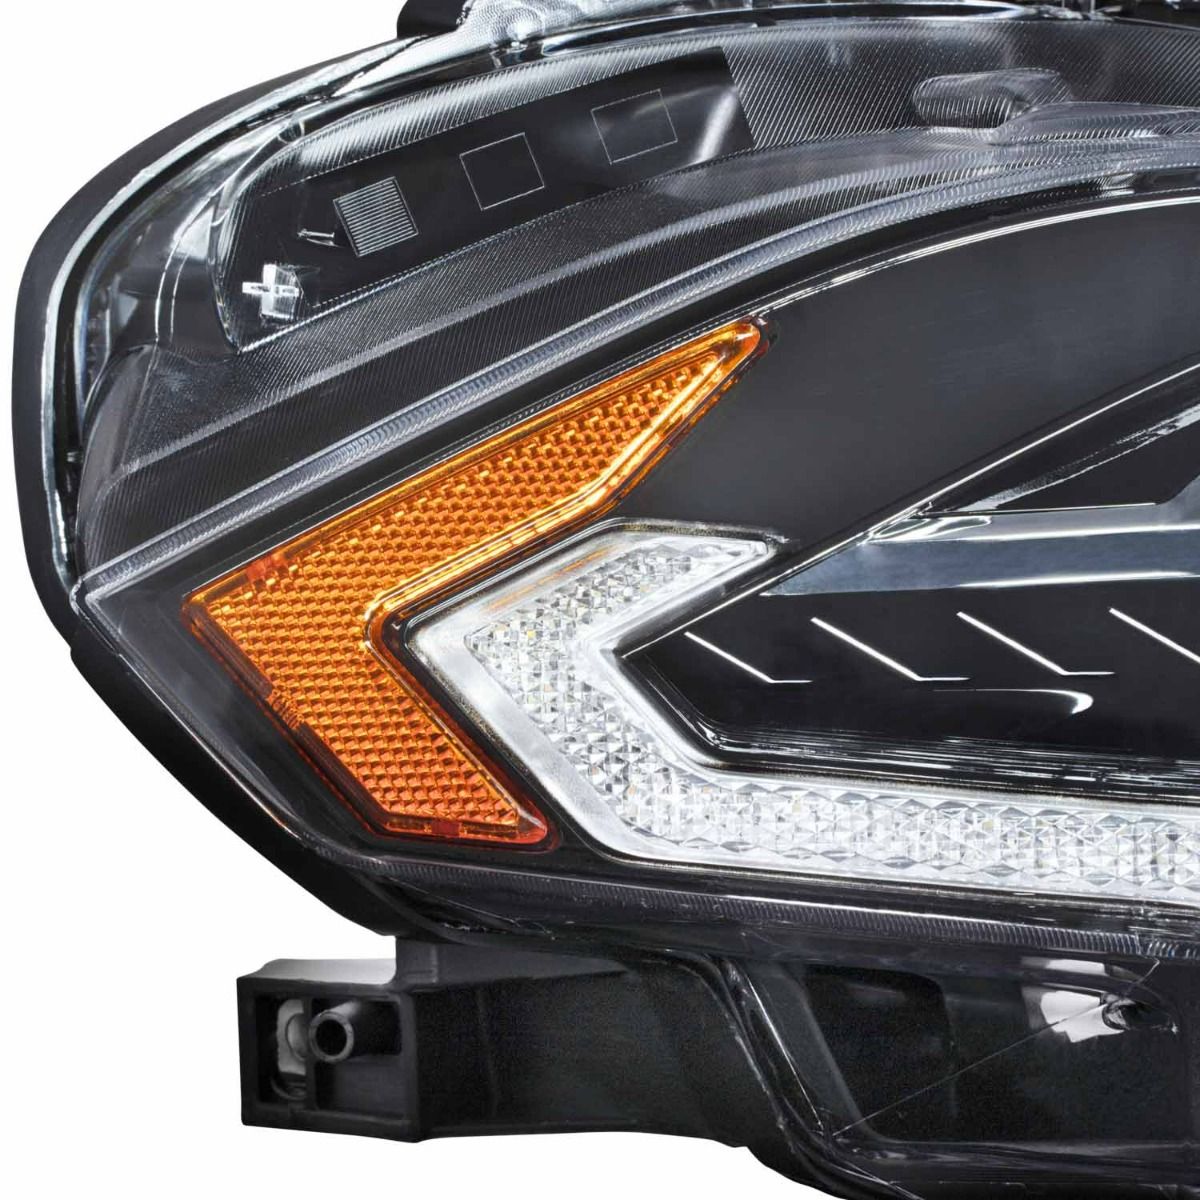 2018-2023 Ford Mustang LED Headlights (pair)